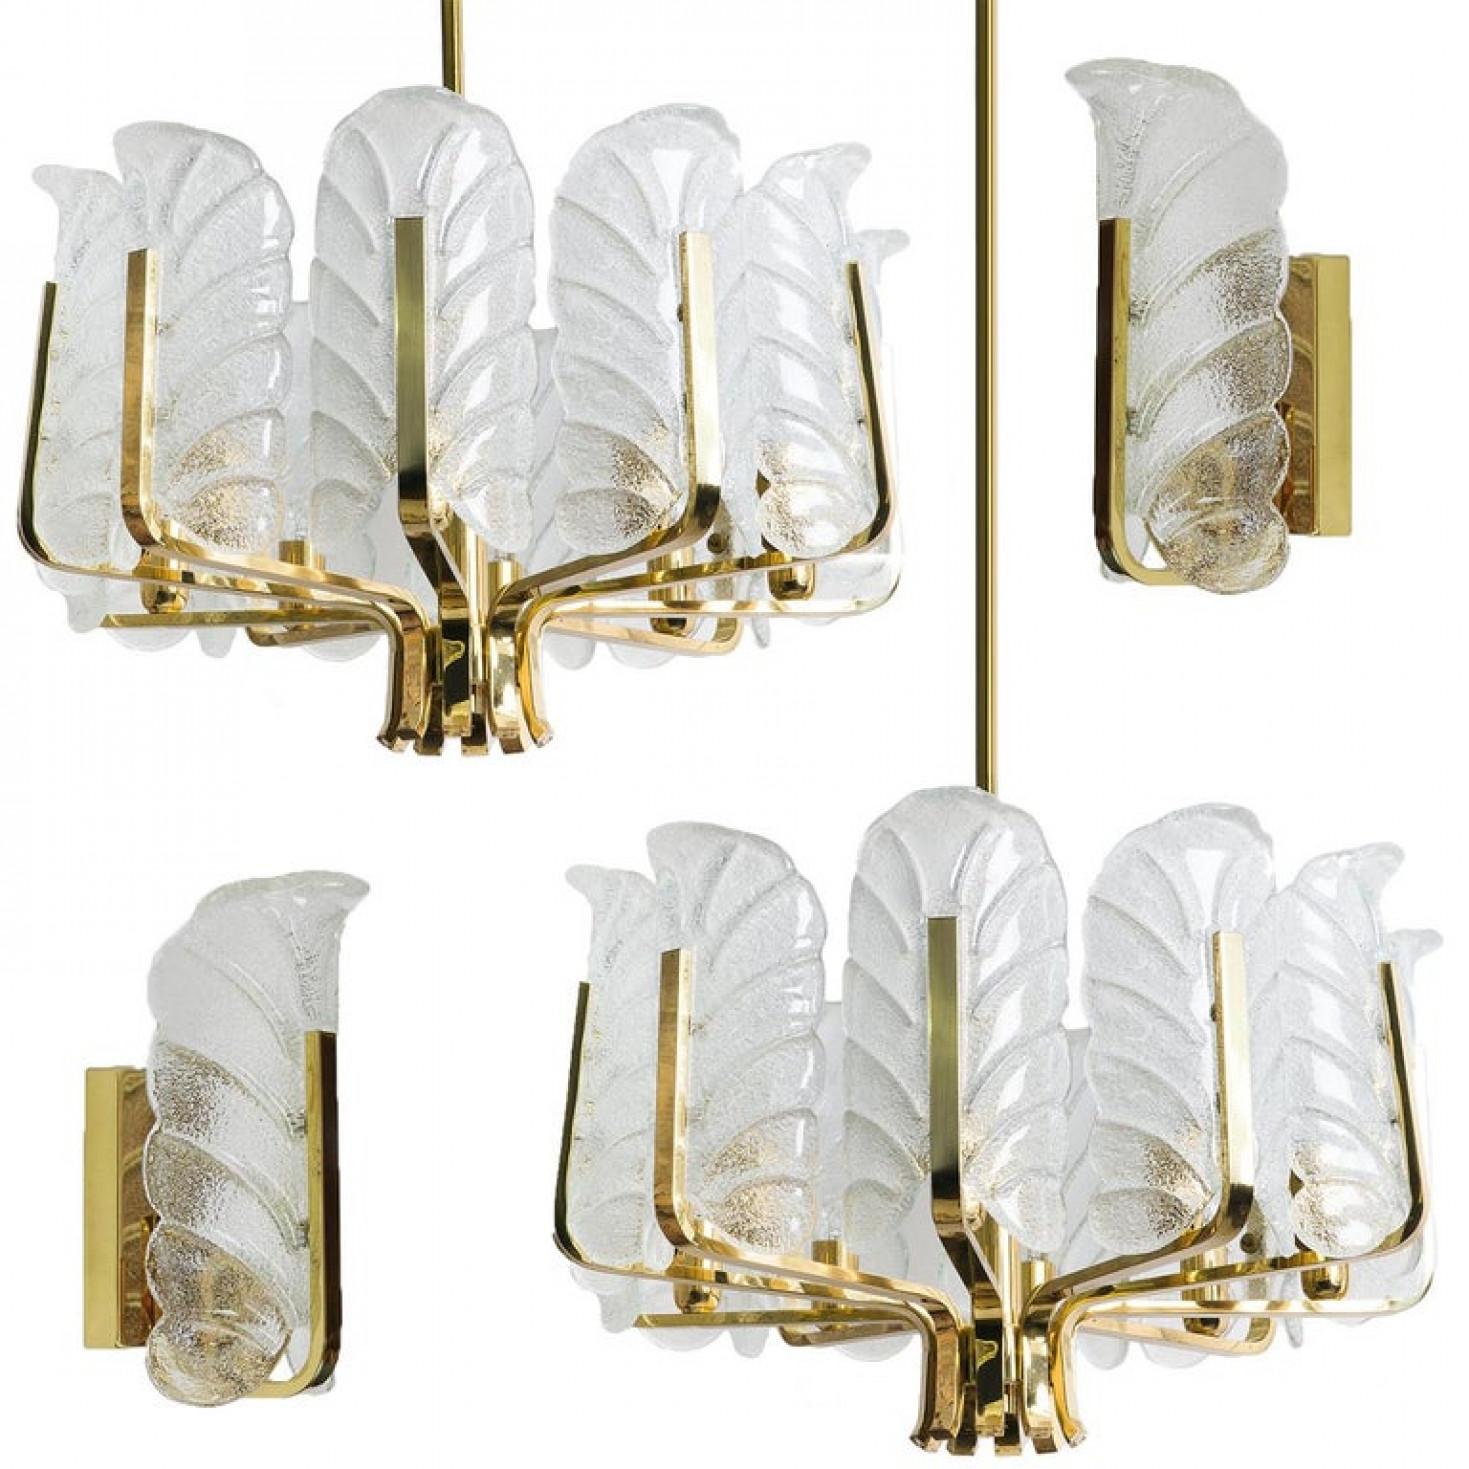 1 of the 5 Pair of Brass Wall Scones by Fagerlund for Orrefors, 1960 6